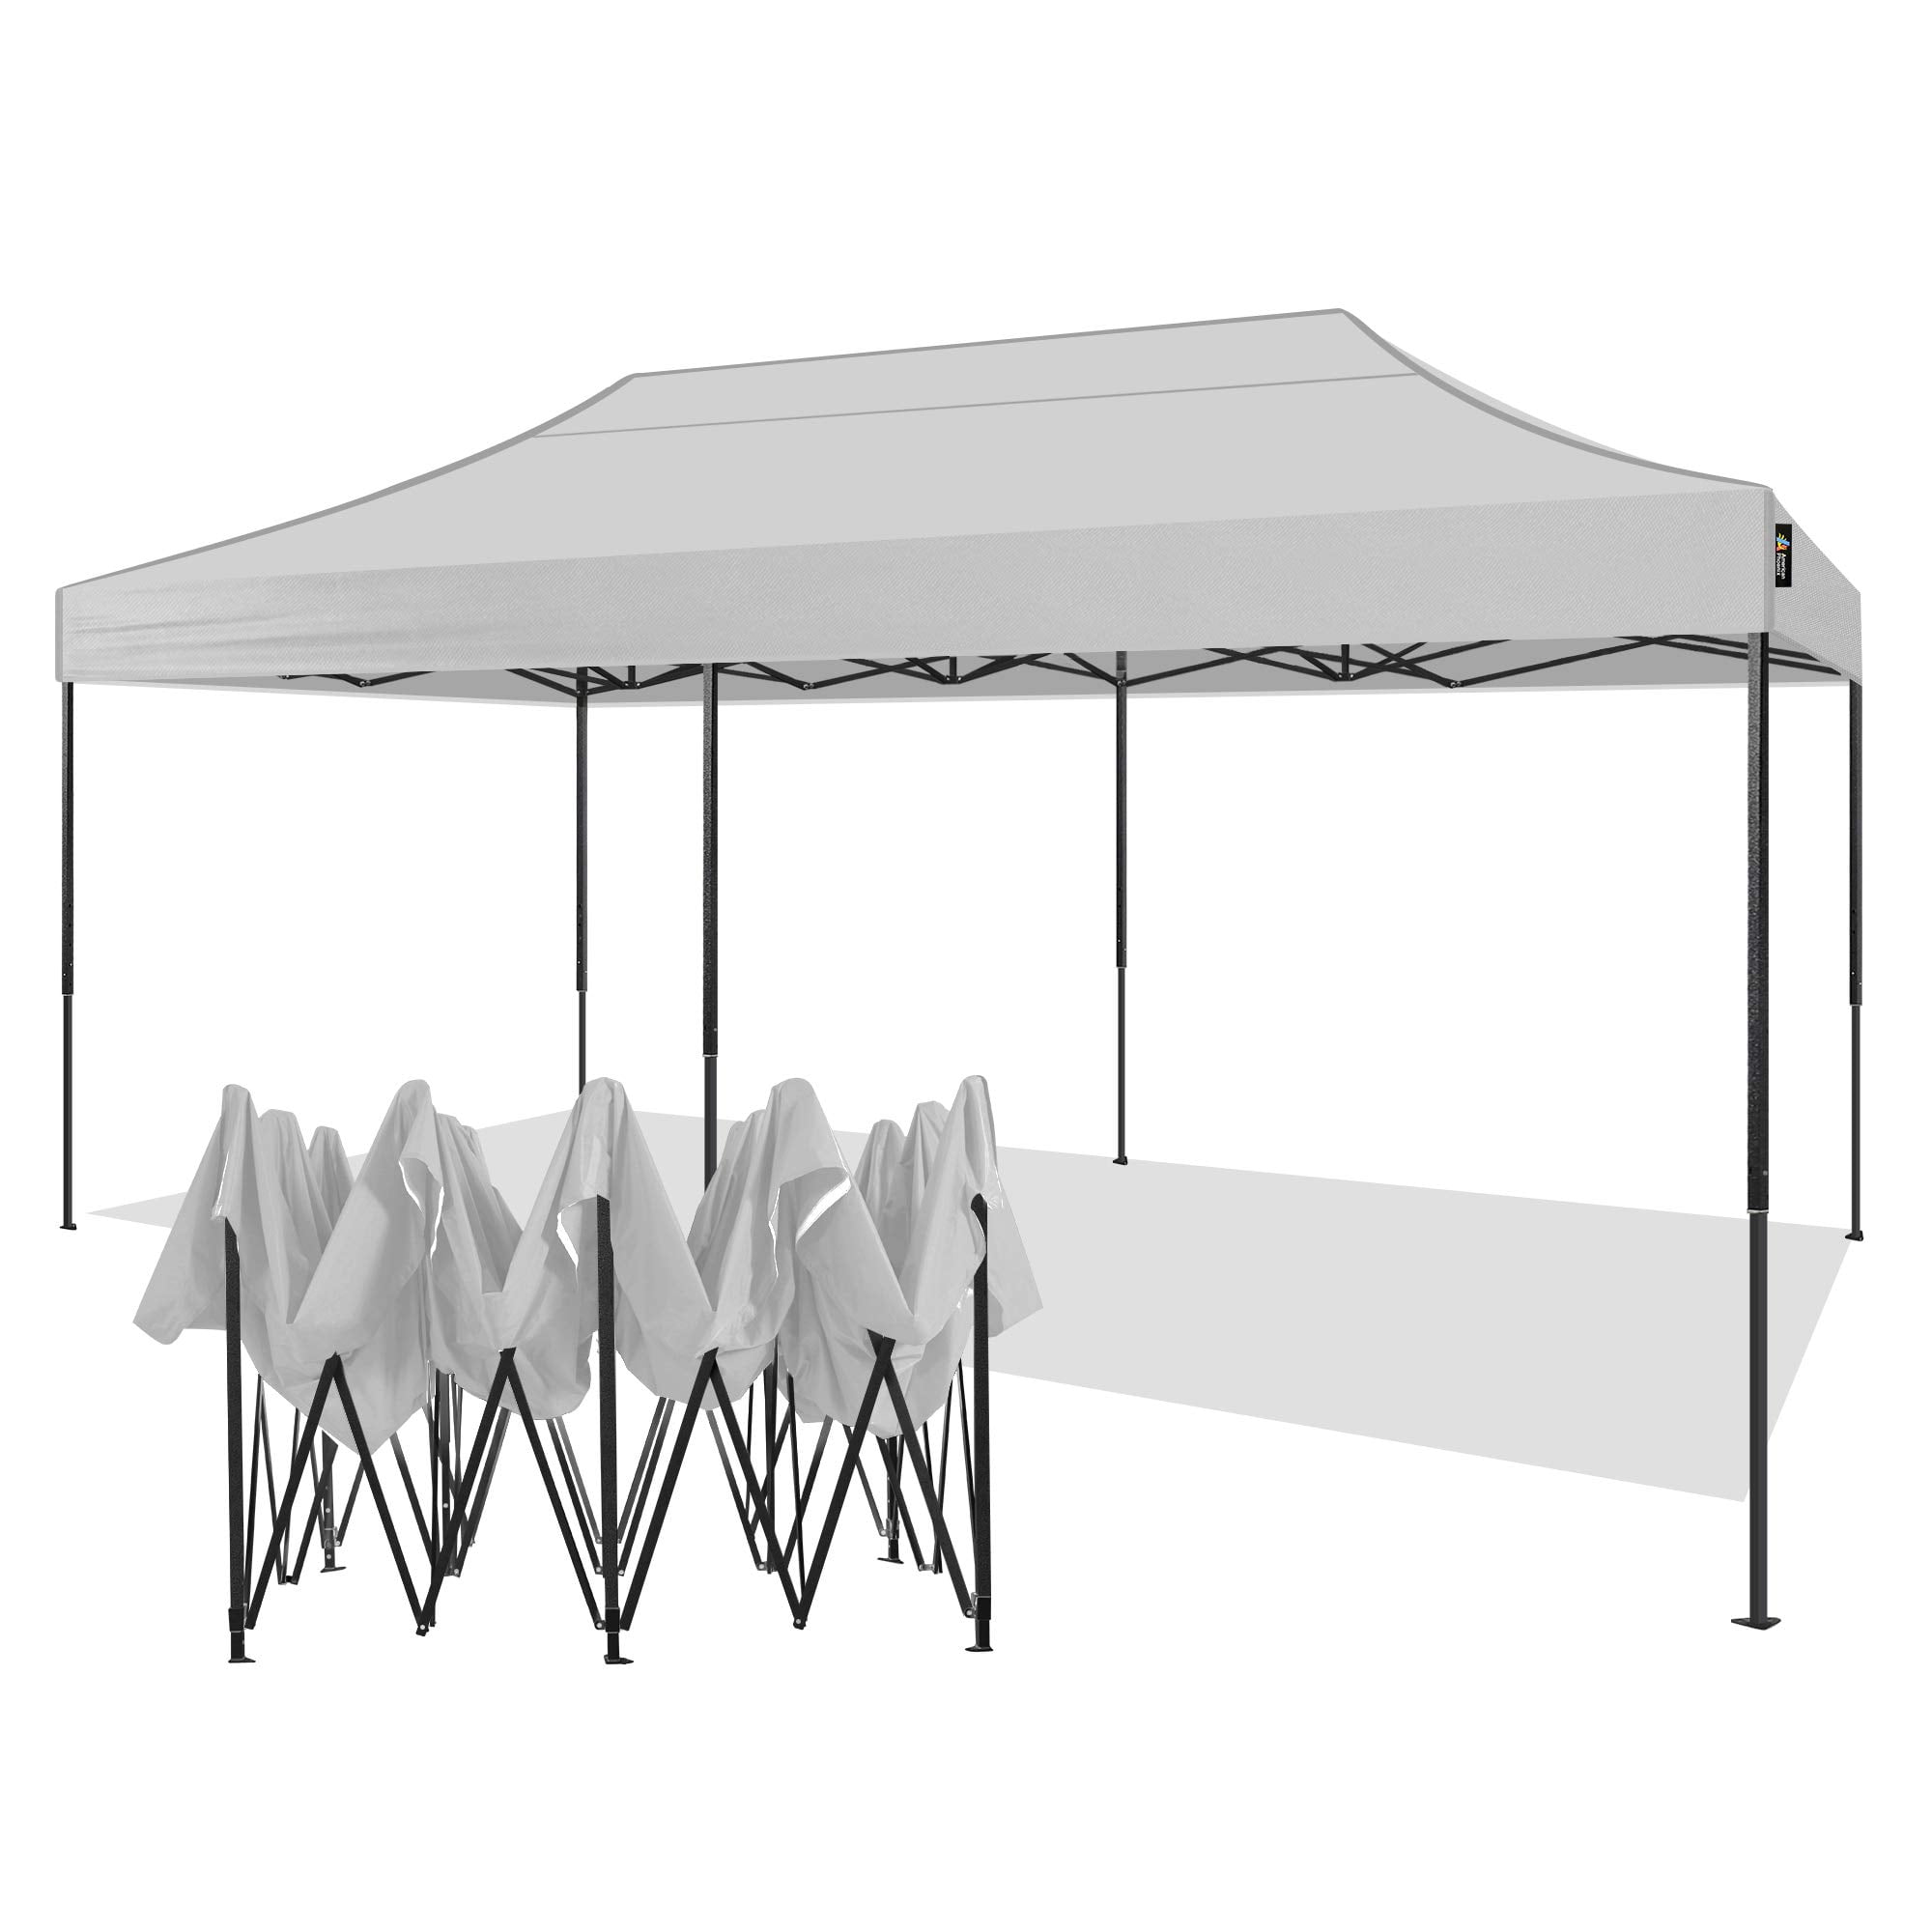 Canopy 10x15 Commercial Fair Shelter Car Shelter Wedding Pop Up Tent Heavy Duty 